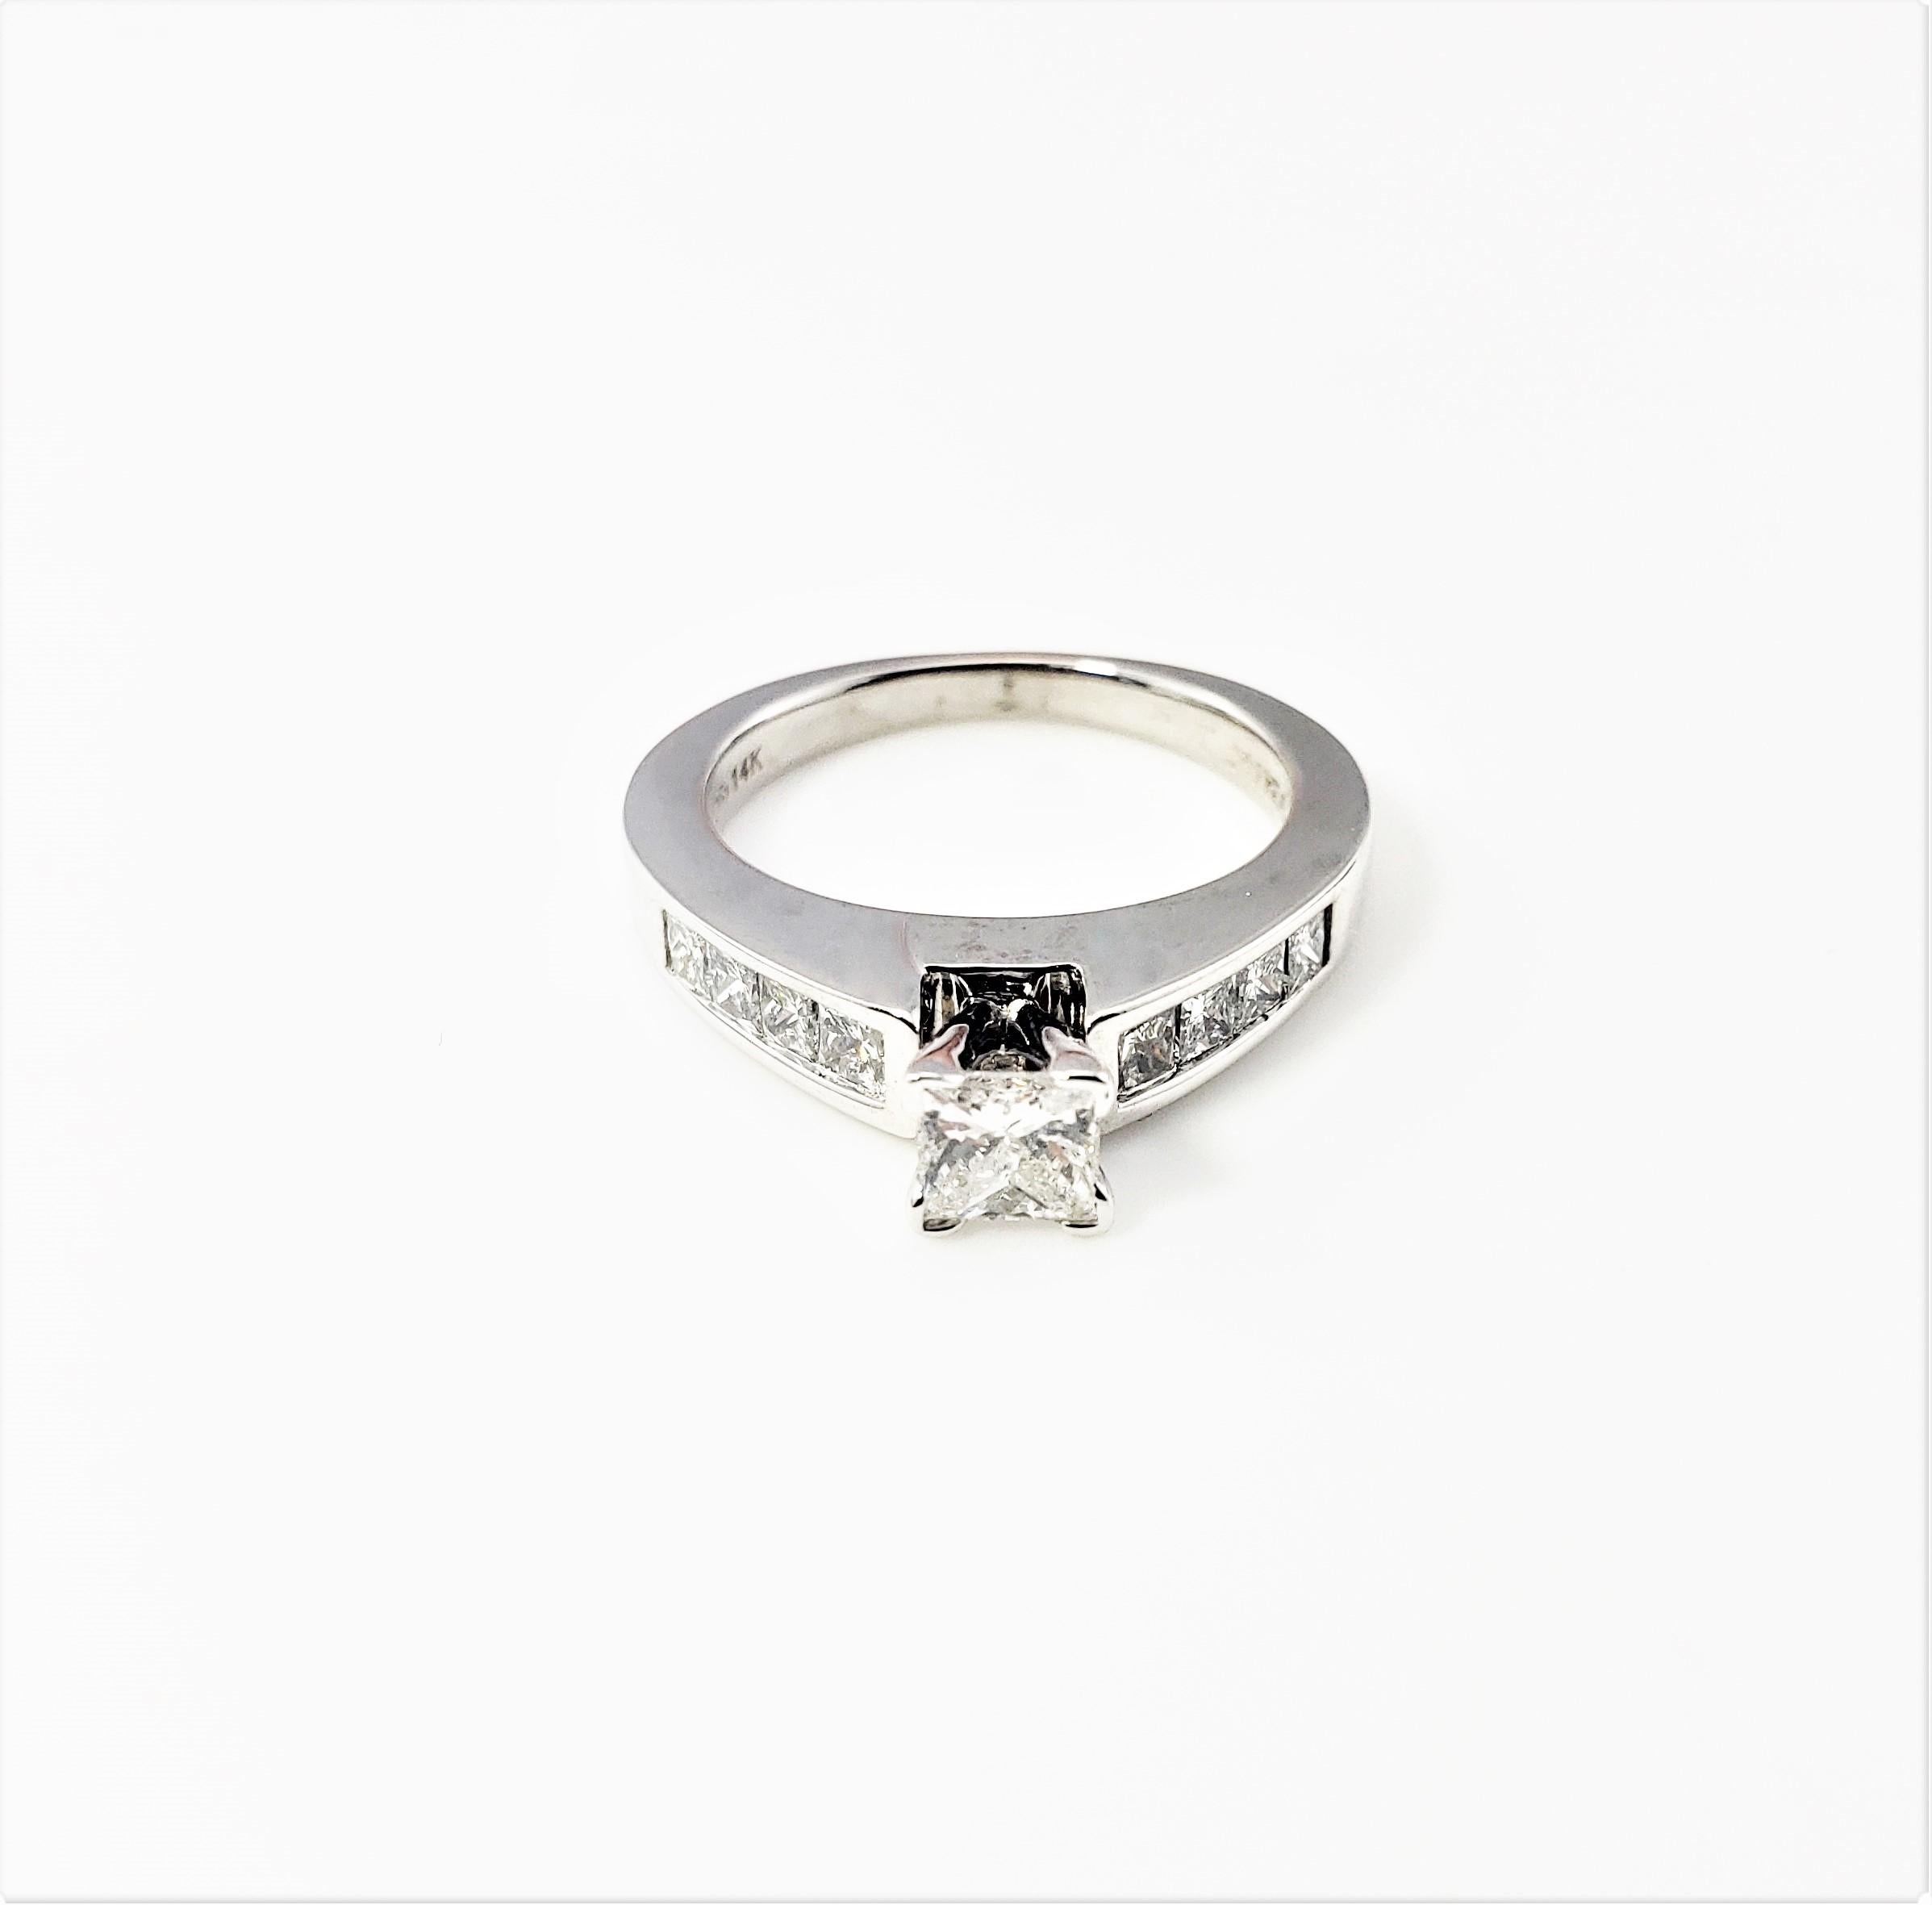 Vintage 14 Karat White Gold Princess Cut Diamond Engagement Ring Size 5.25-

This sparkling engagement ring features one princess cut diamond in its center (.35 ct.) and eight graduated princess cut diamonds (.52 ct. TWT.) on its band. Shank: 2 mm.